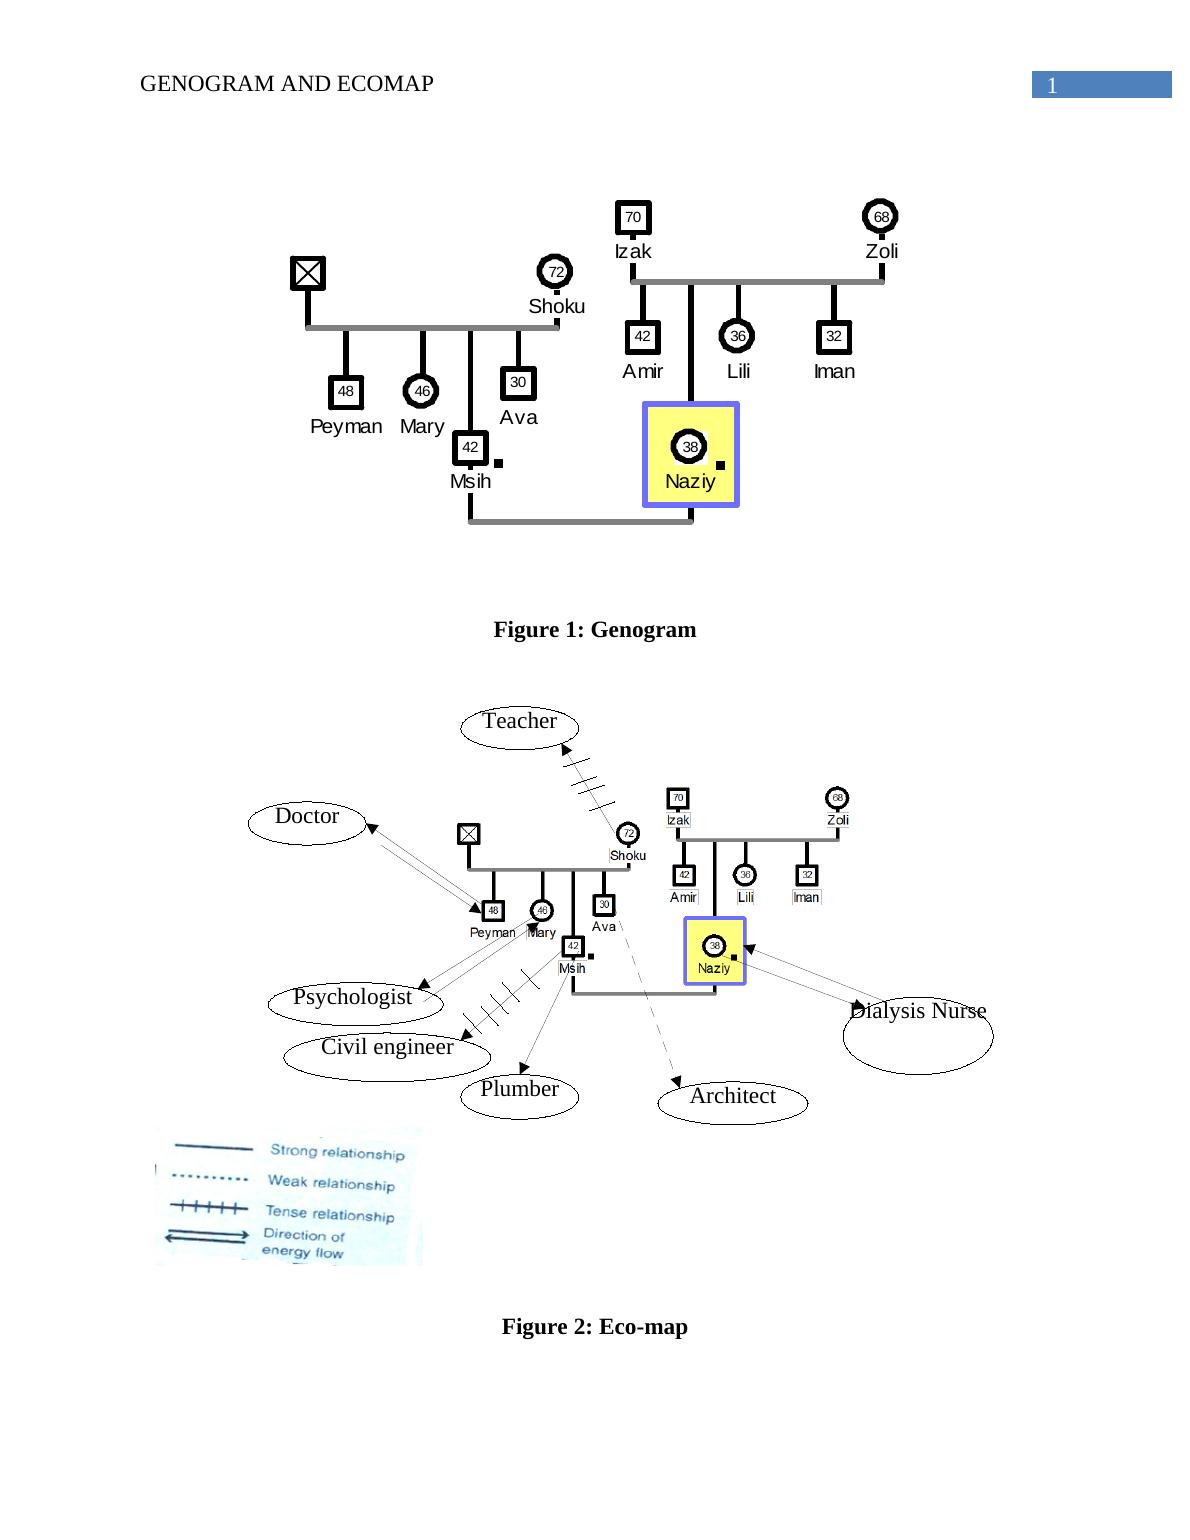 Genogram and Ecomap - Applications in Family Nursing Practice_2